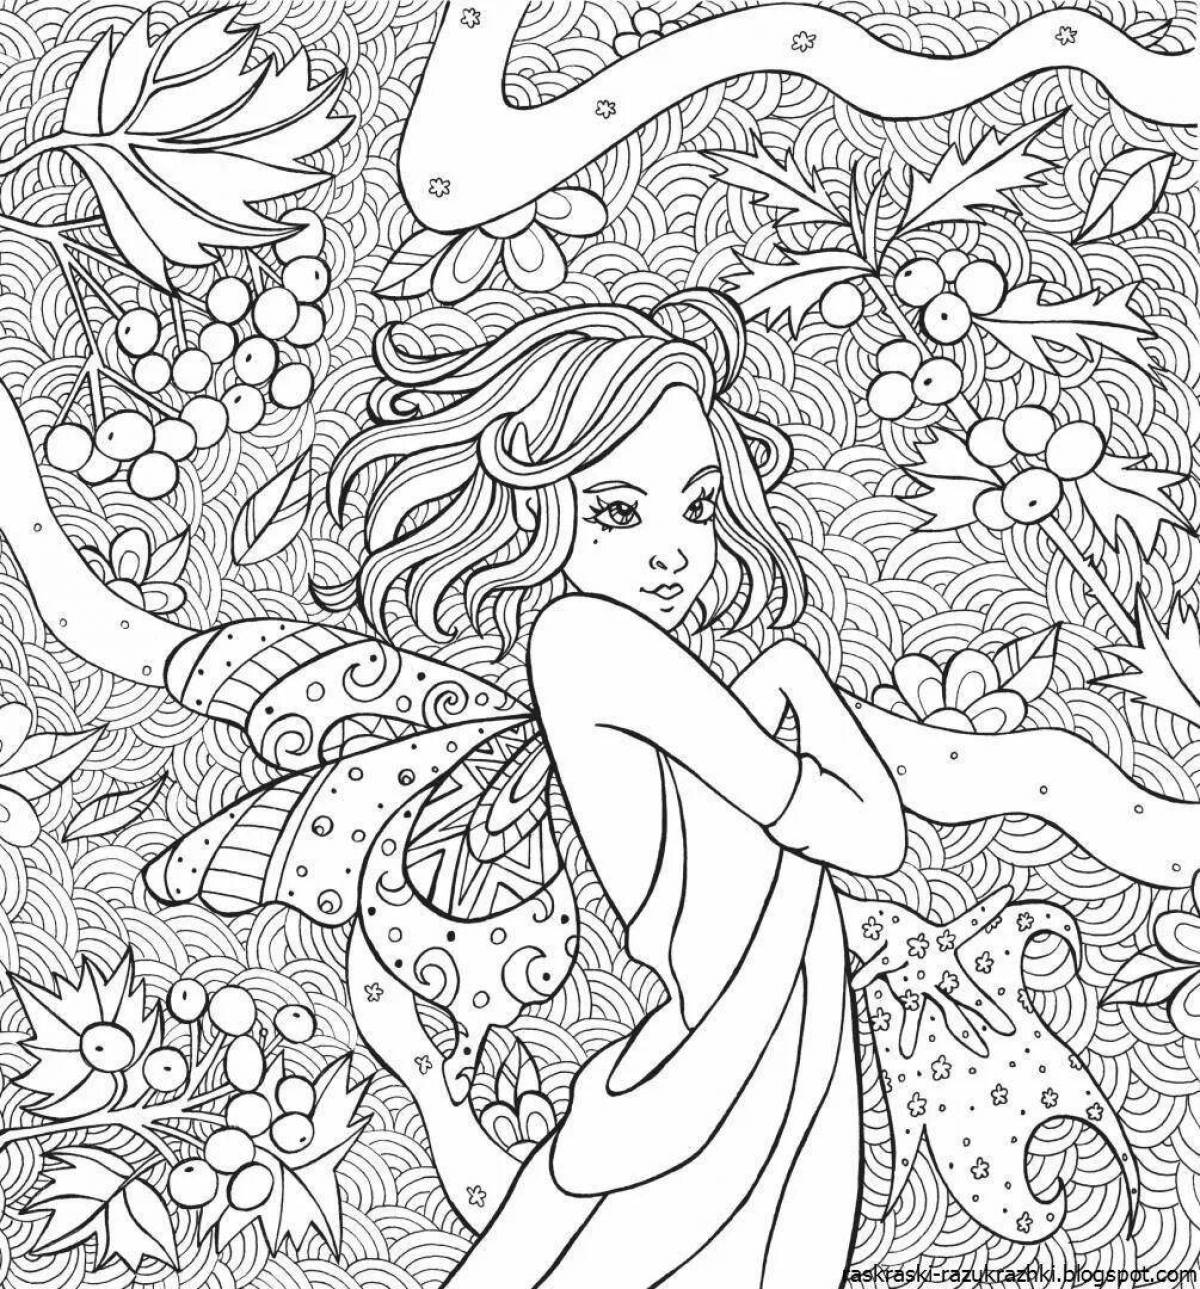 Great coloring book for 11 years for girls difficult